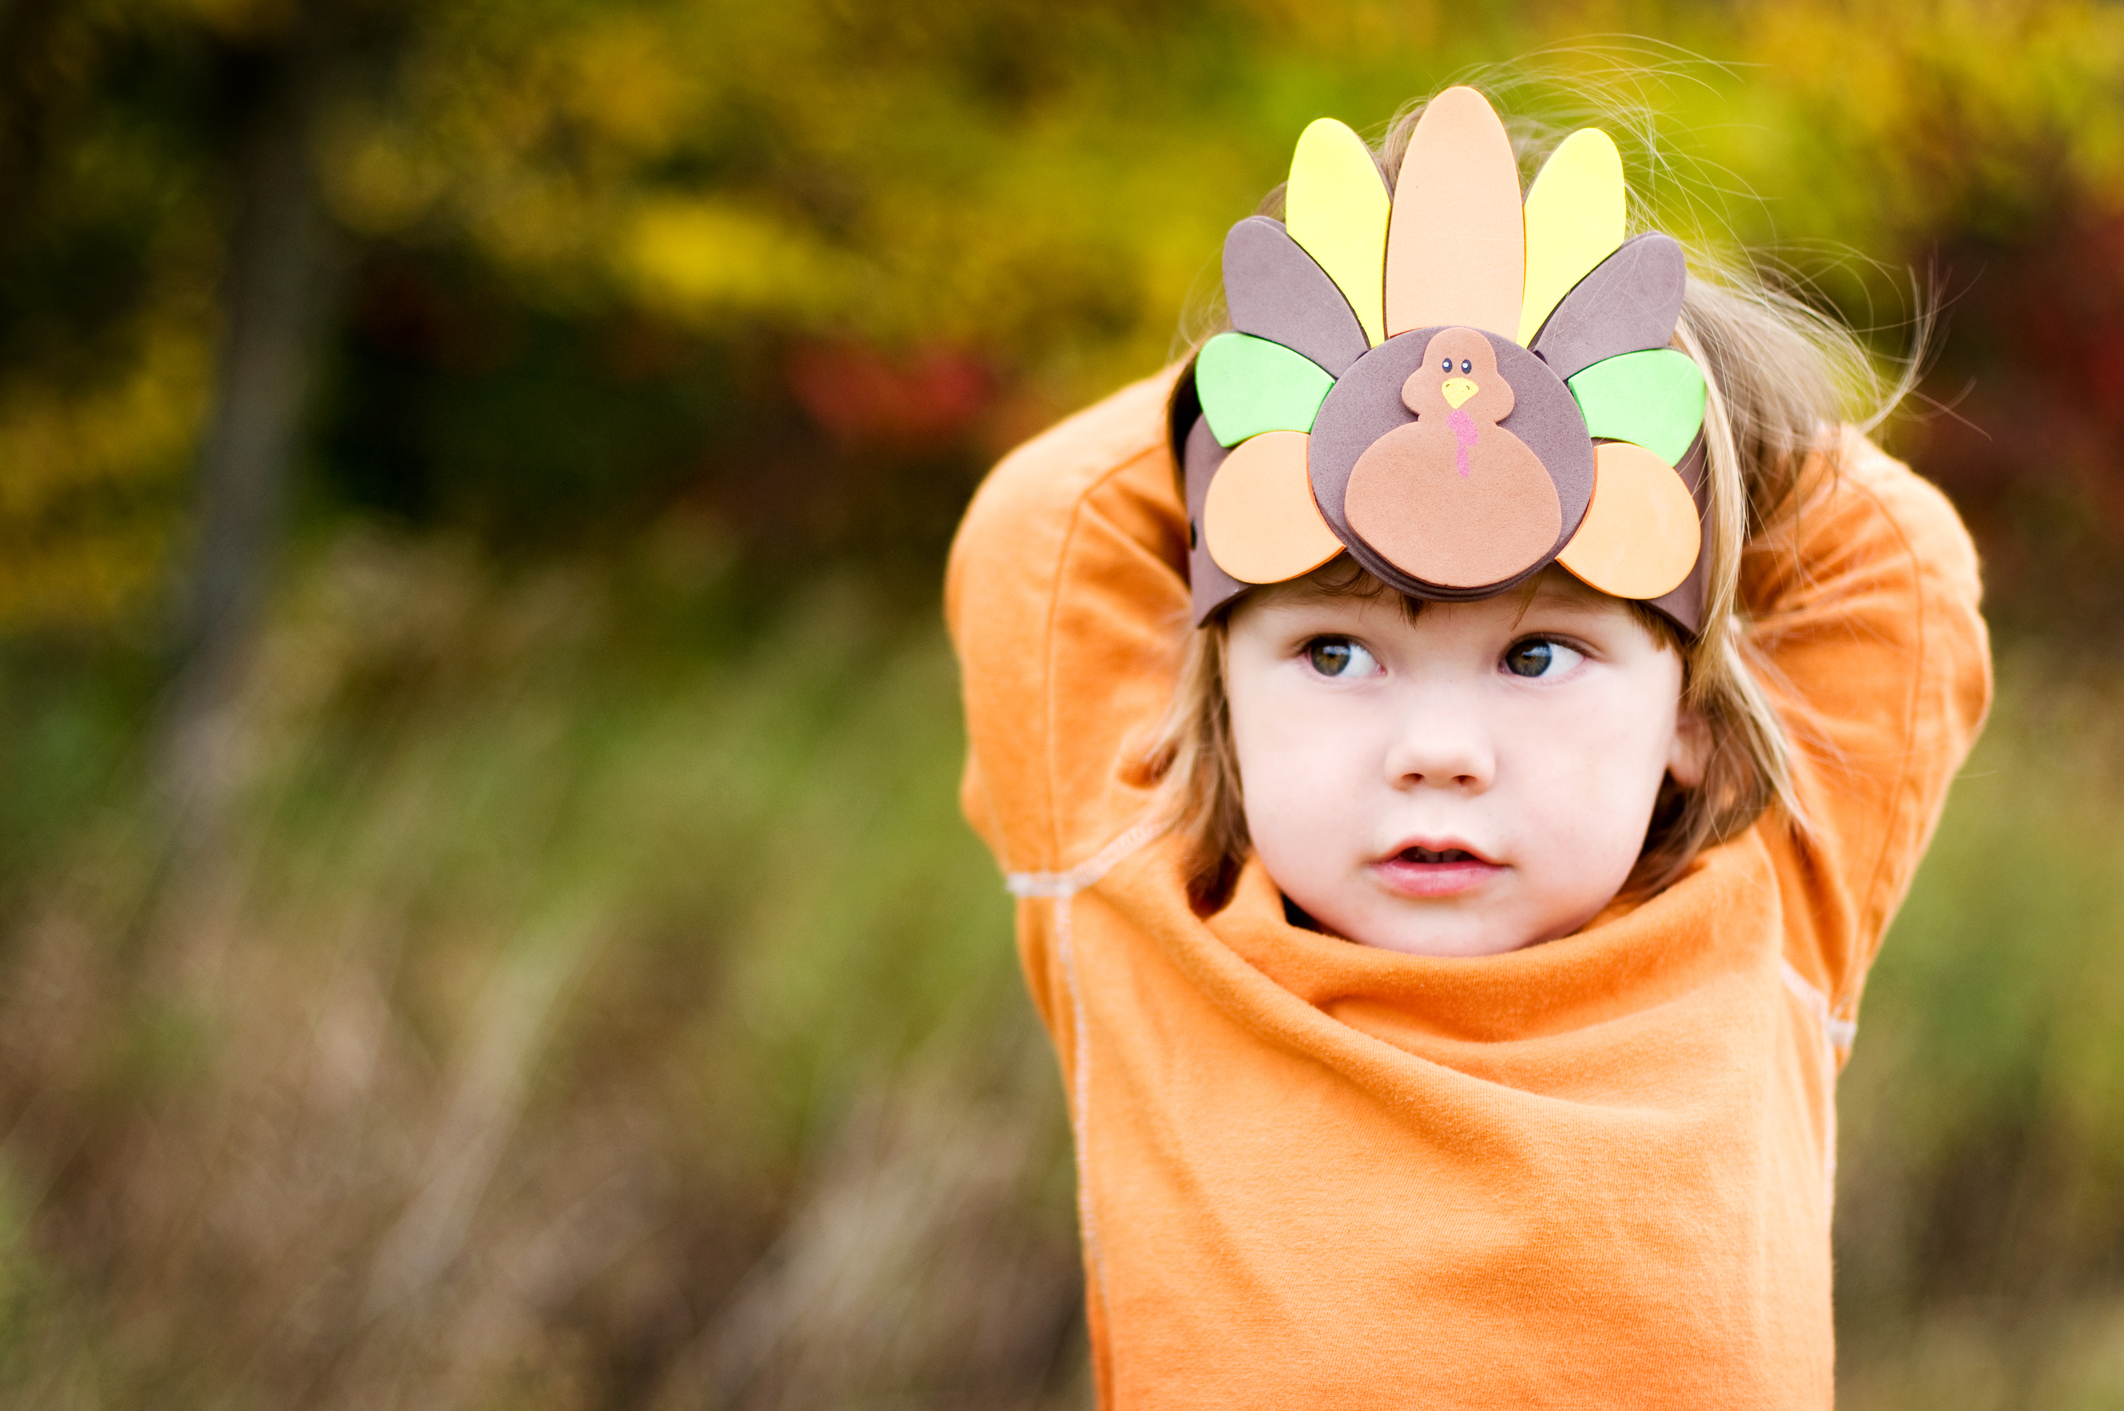 Little boy with a Turkey hat.  Focus on the hat.